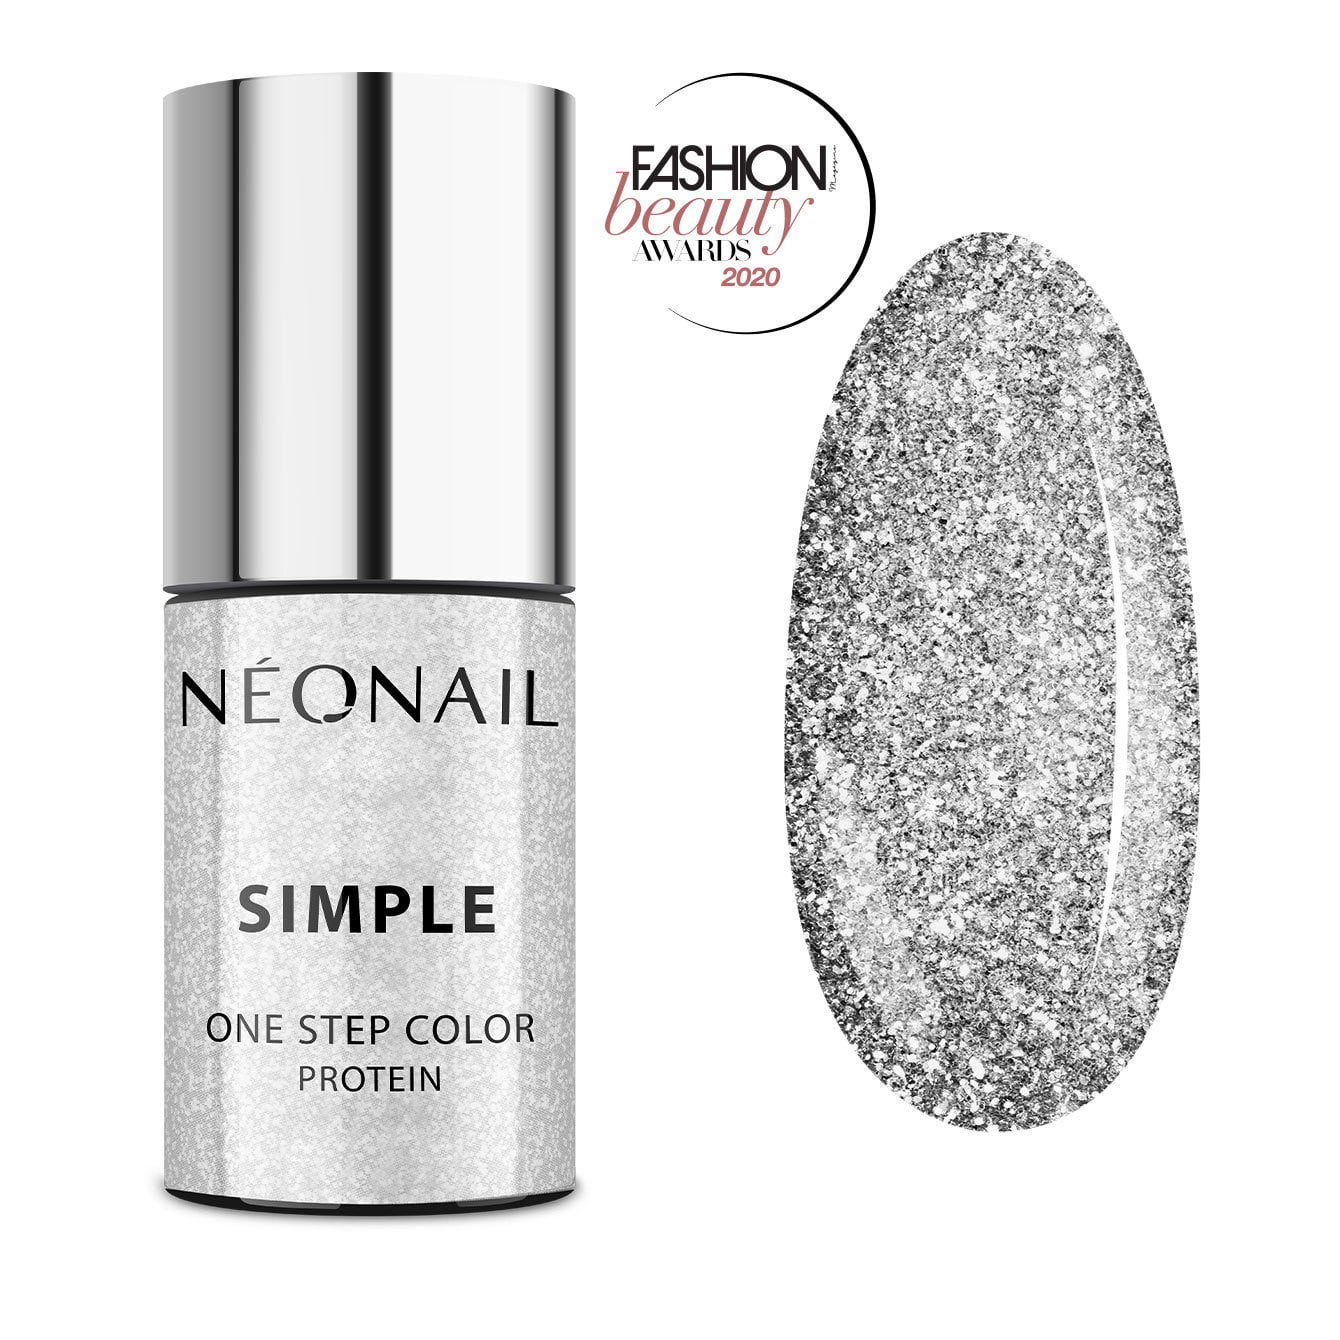 NeoNail Simple One Step Color Protein 7,2ml - FANCY